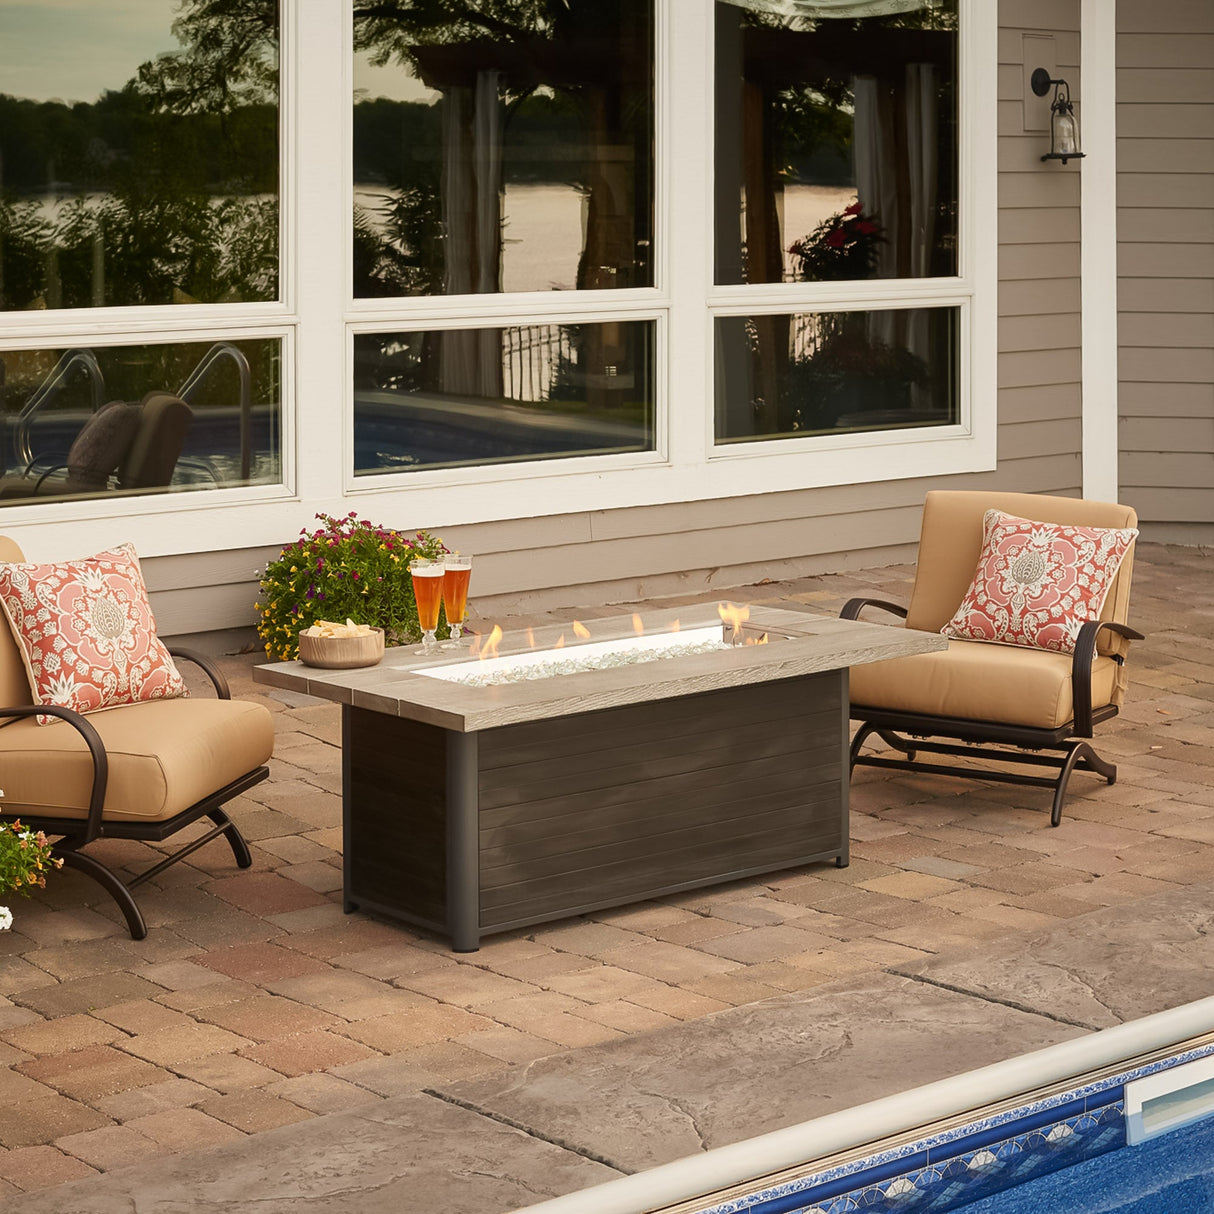 The Cedar Ridge Linear Gas Fire Pit Table in a patio setting, next to furniture and a pool